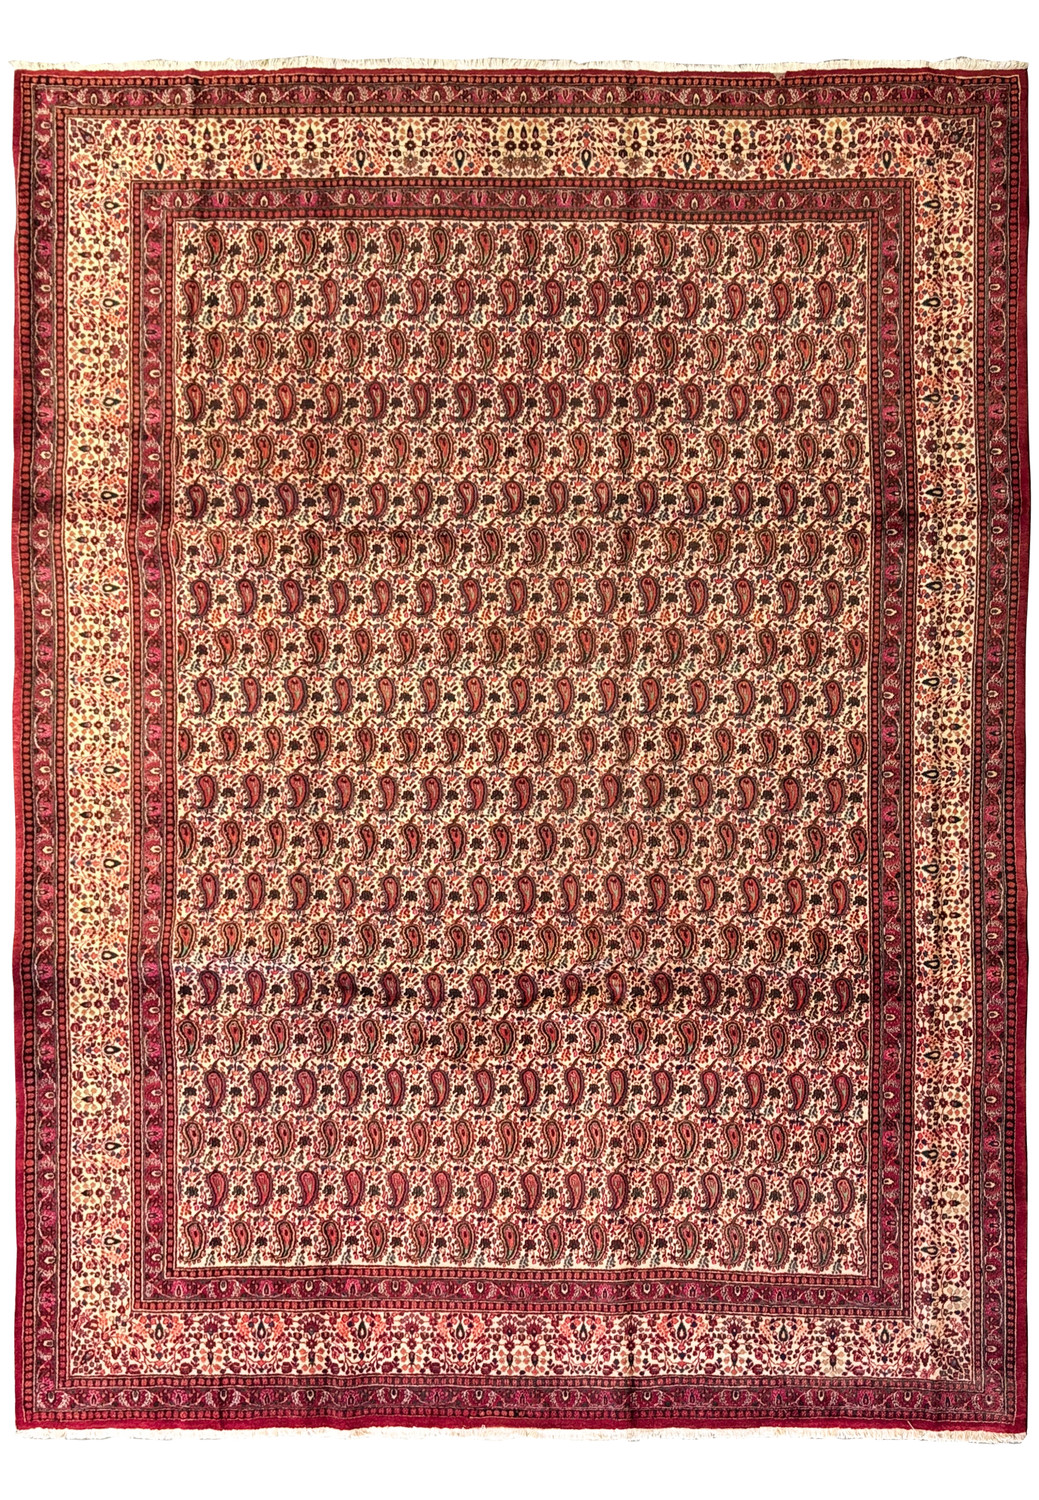 Full view of a 10x14 Persian Moud Rug on a flat surface, highlighting the symmetrical arrangement of traditional motifs and the harmonious blend of colors in the dense pattern work.